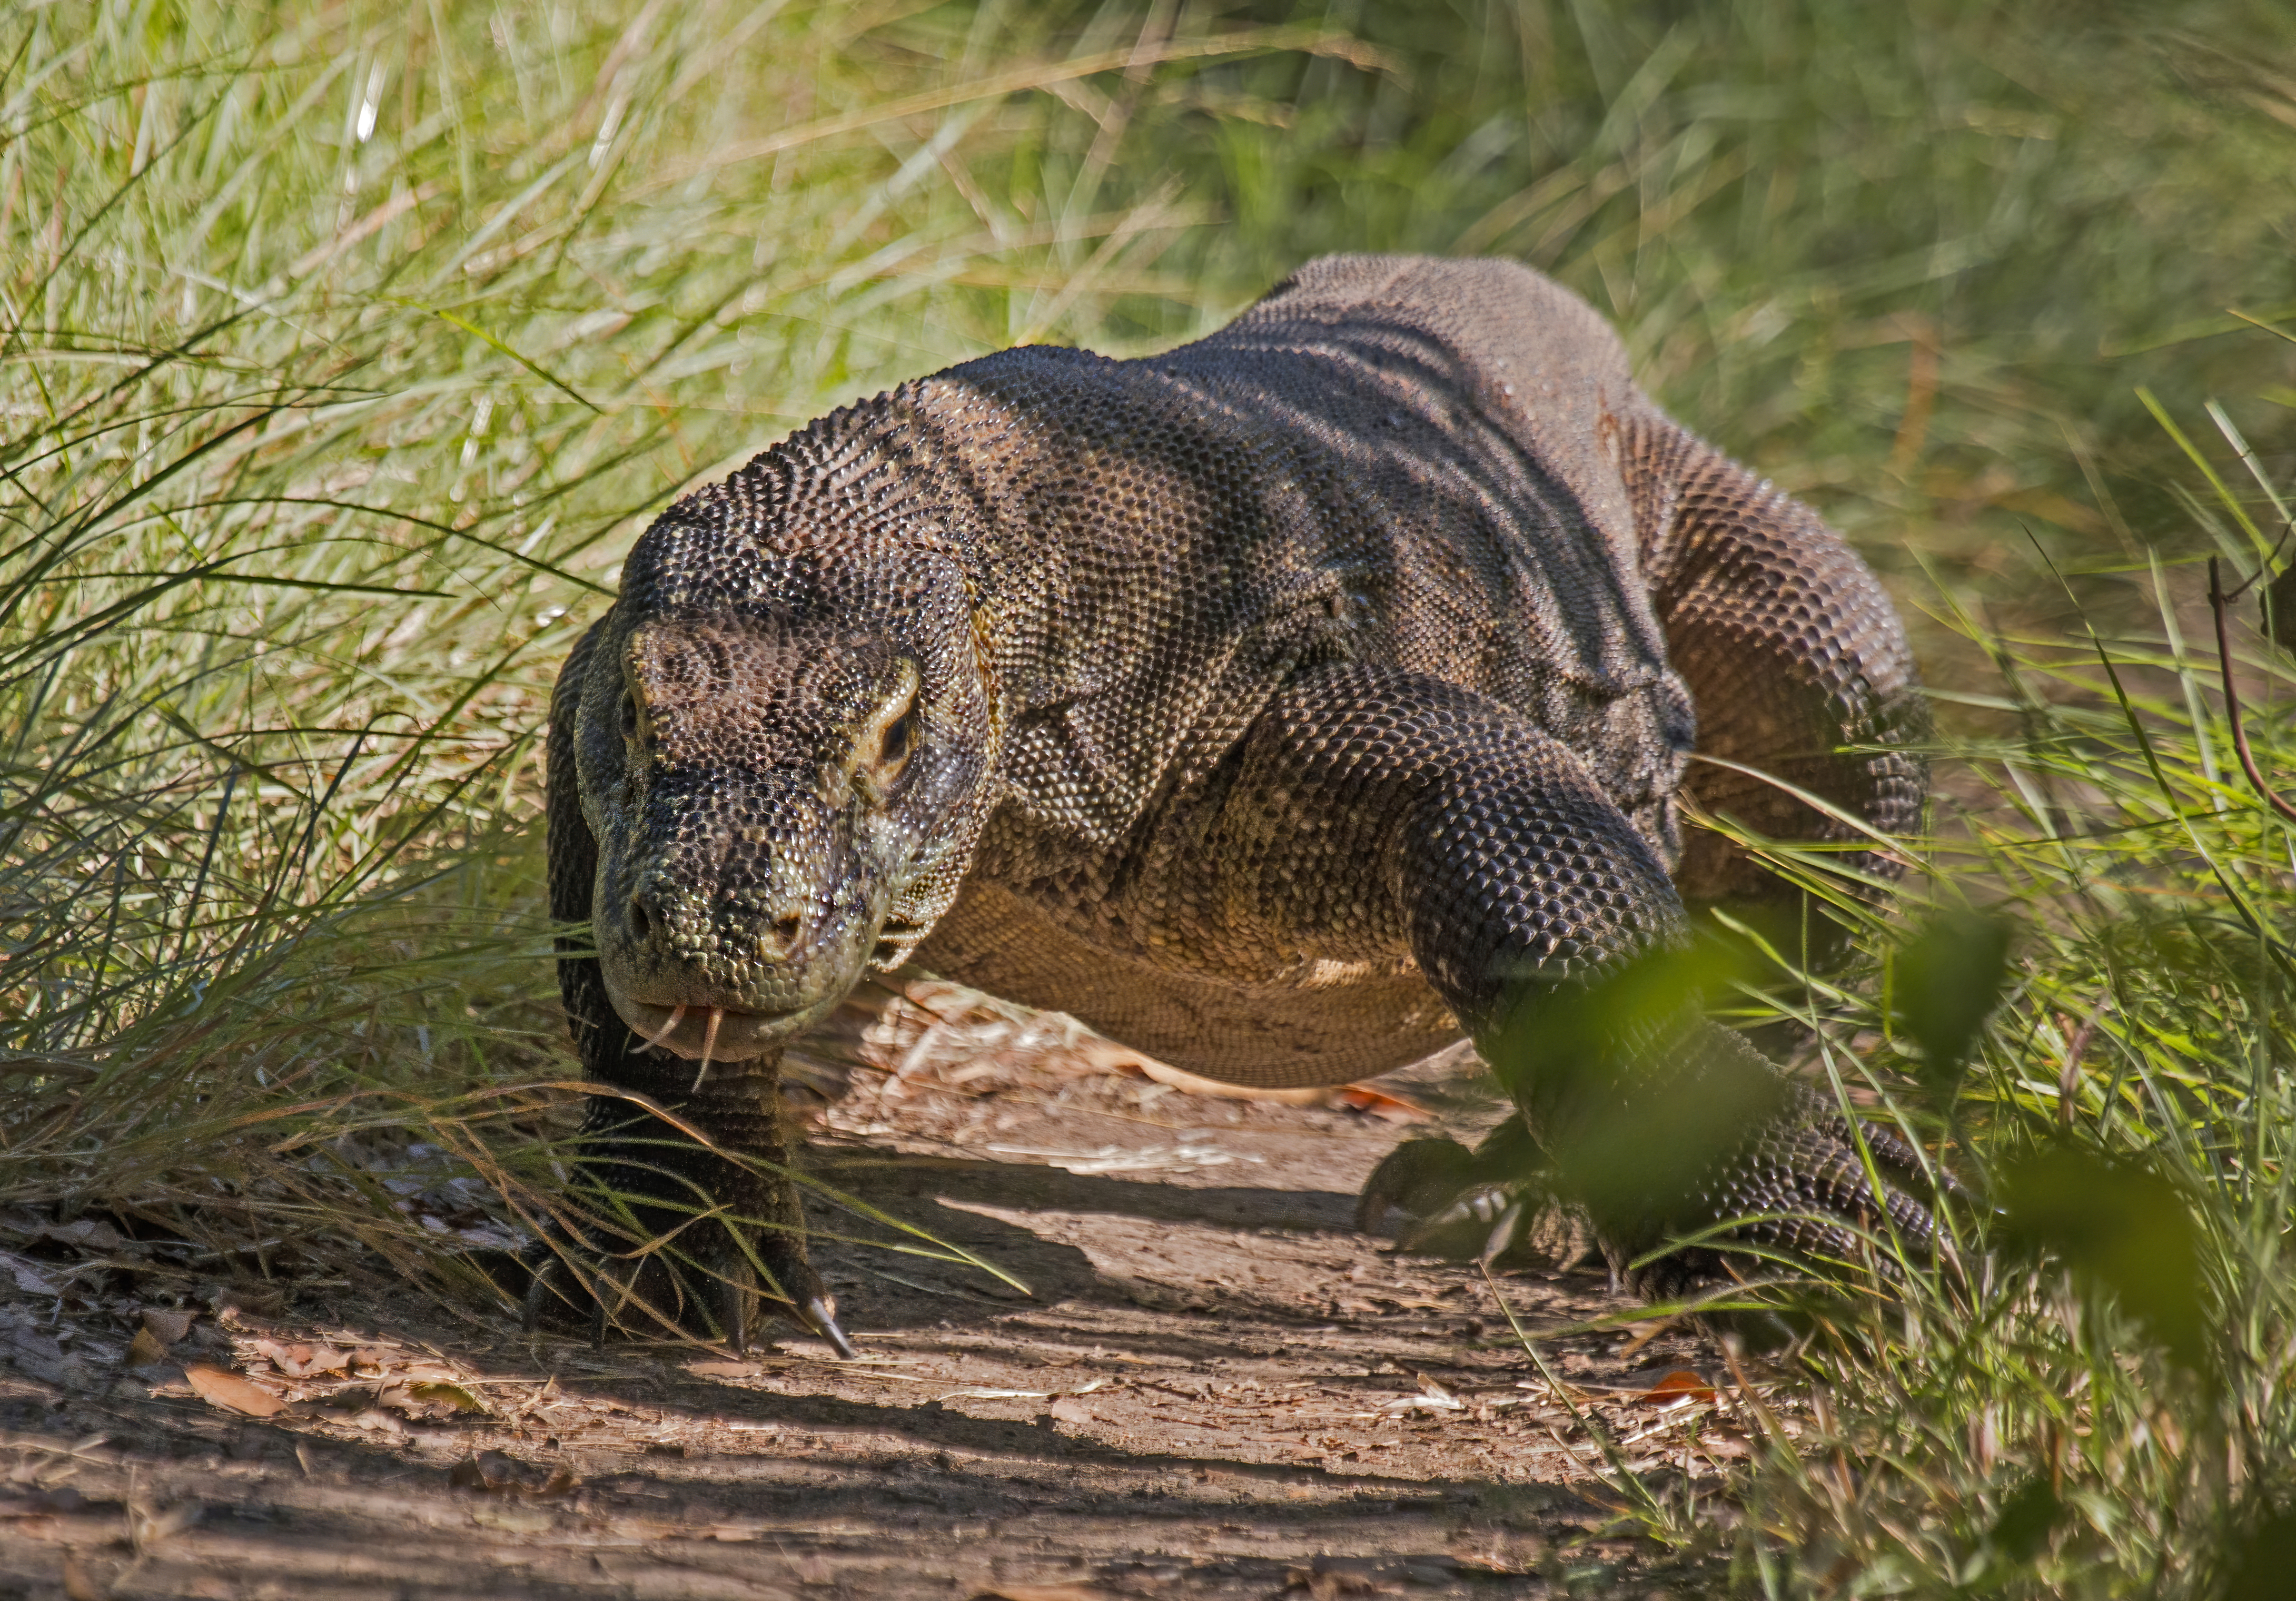 What phylum is the Komodo dragon in?